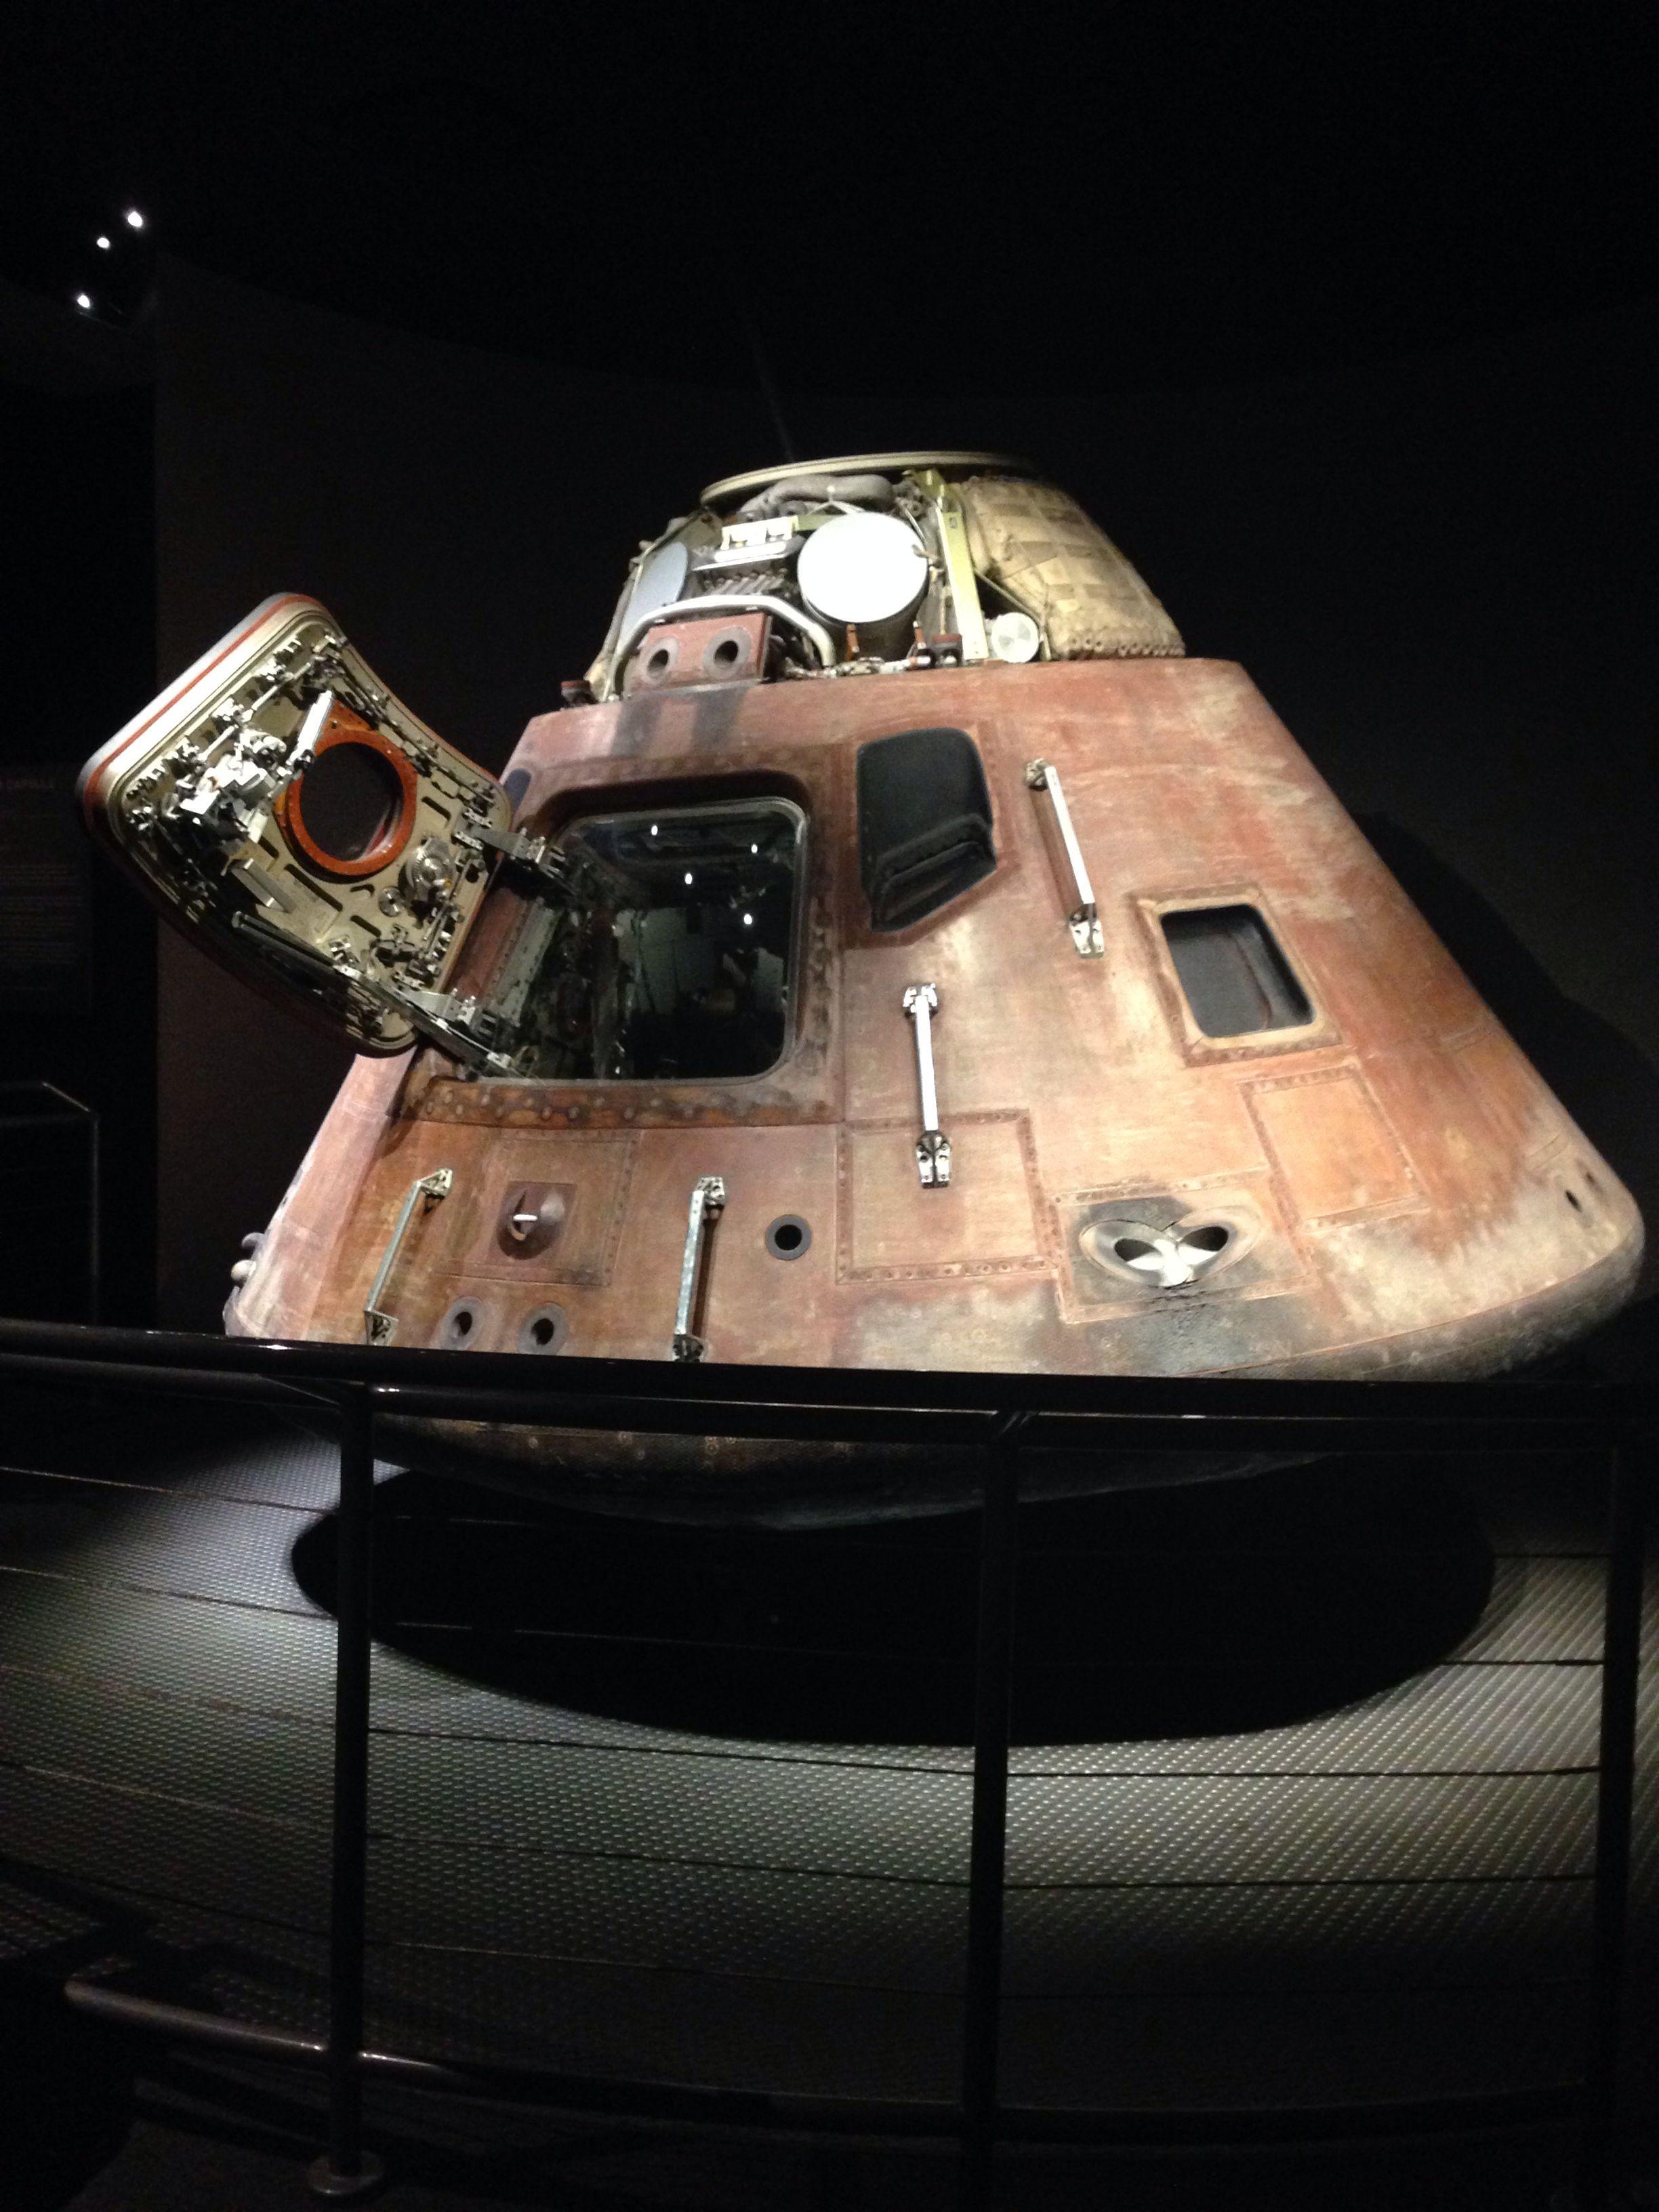 Apollo 13 capsule at Kennedy Space Center. Space, the final